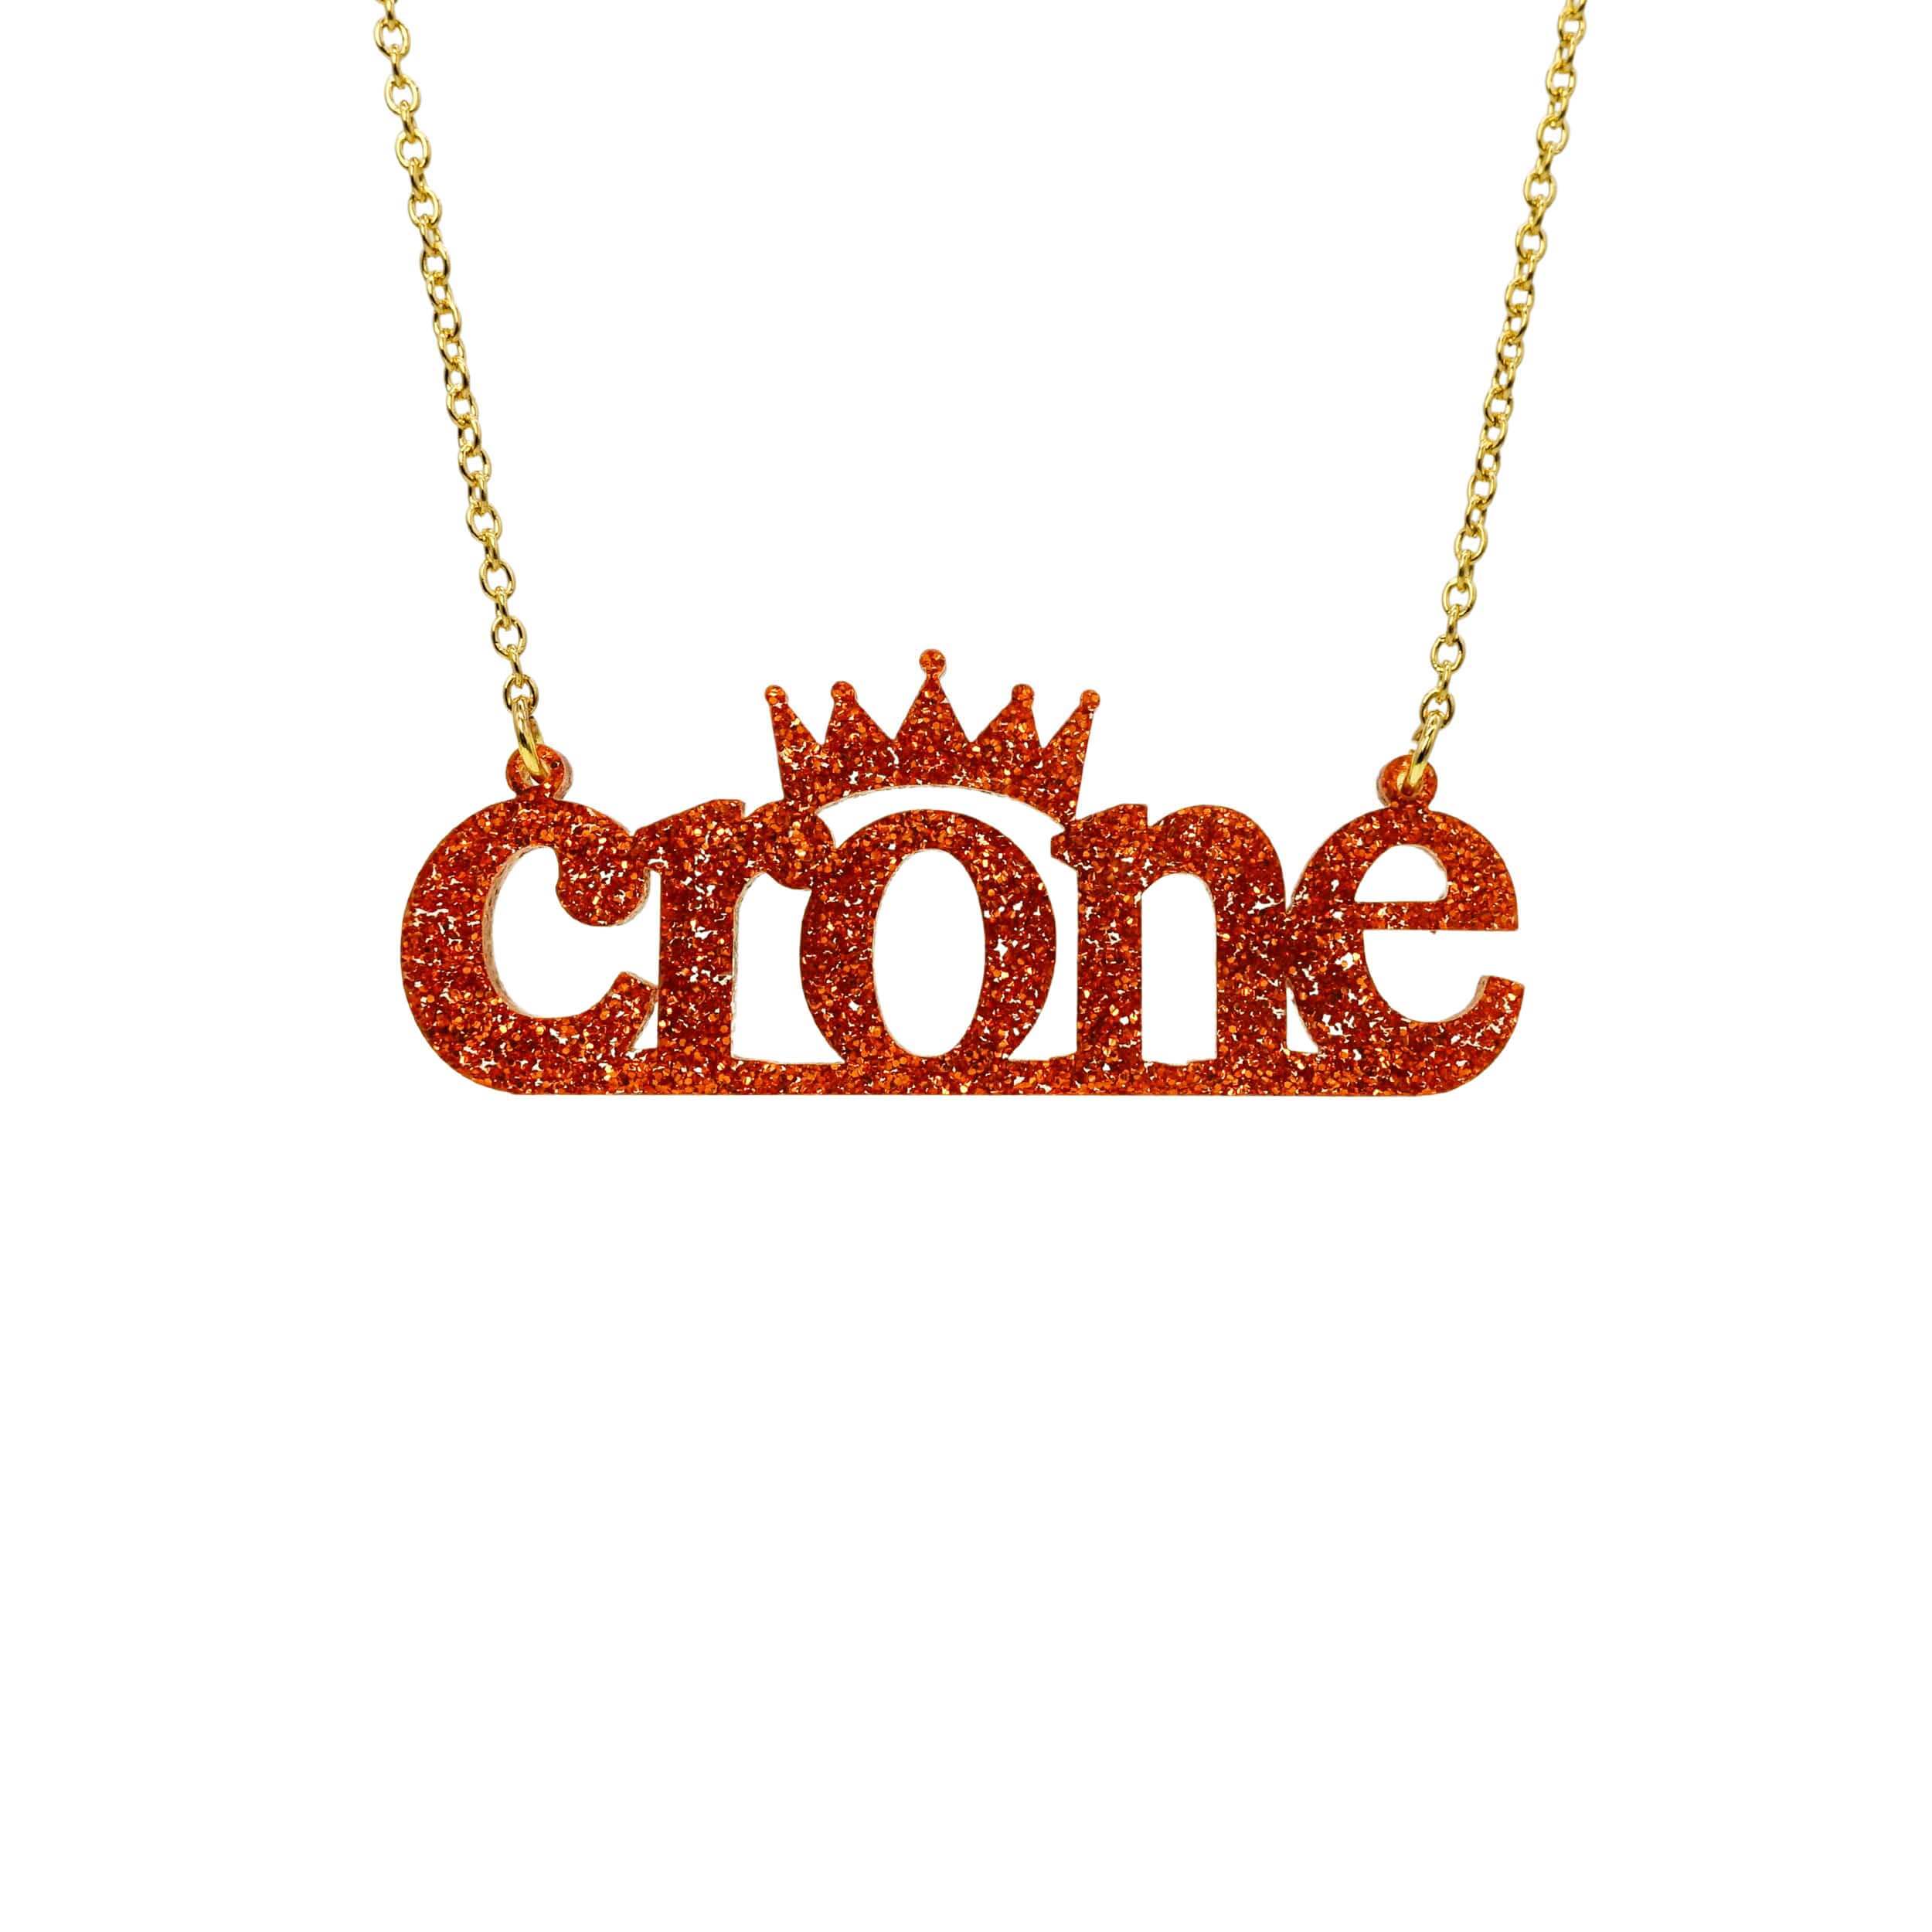 Crone necklace in flame glitter, shown hanging against a white background. 